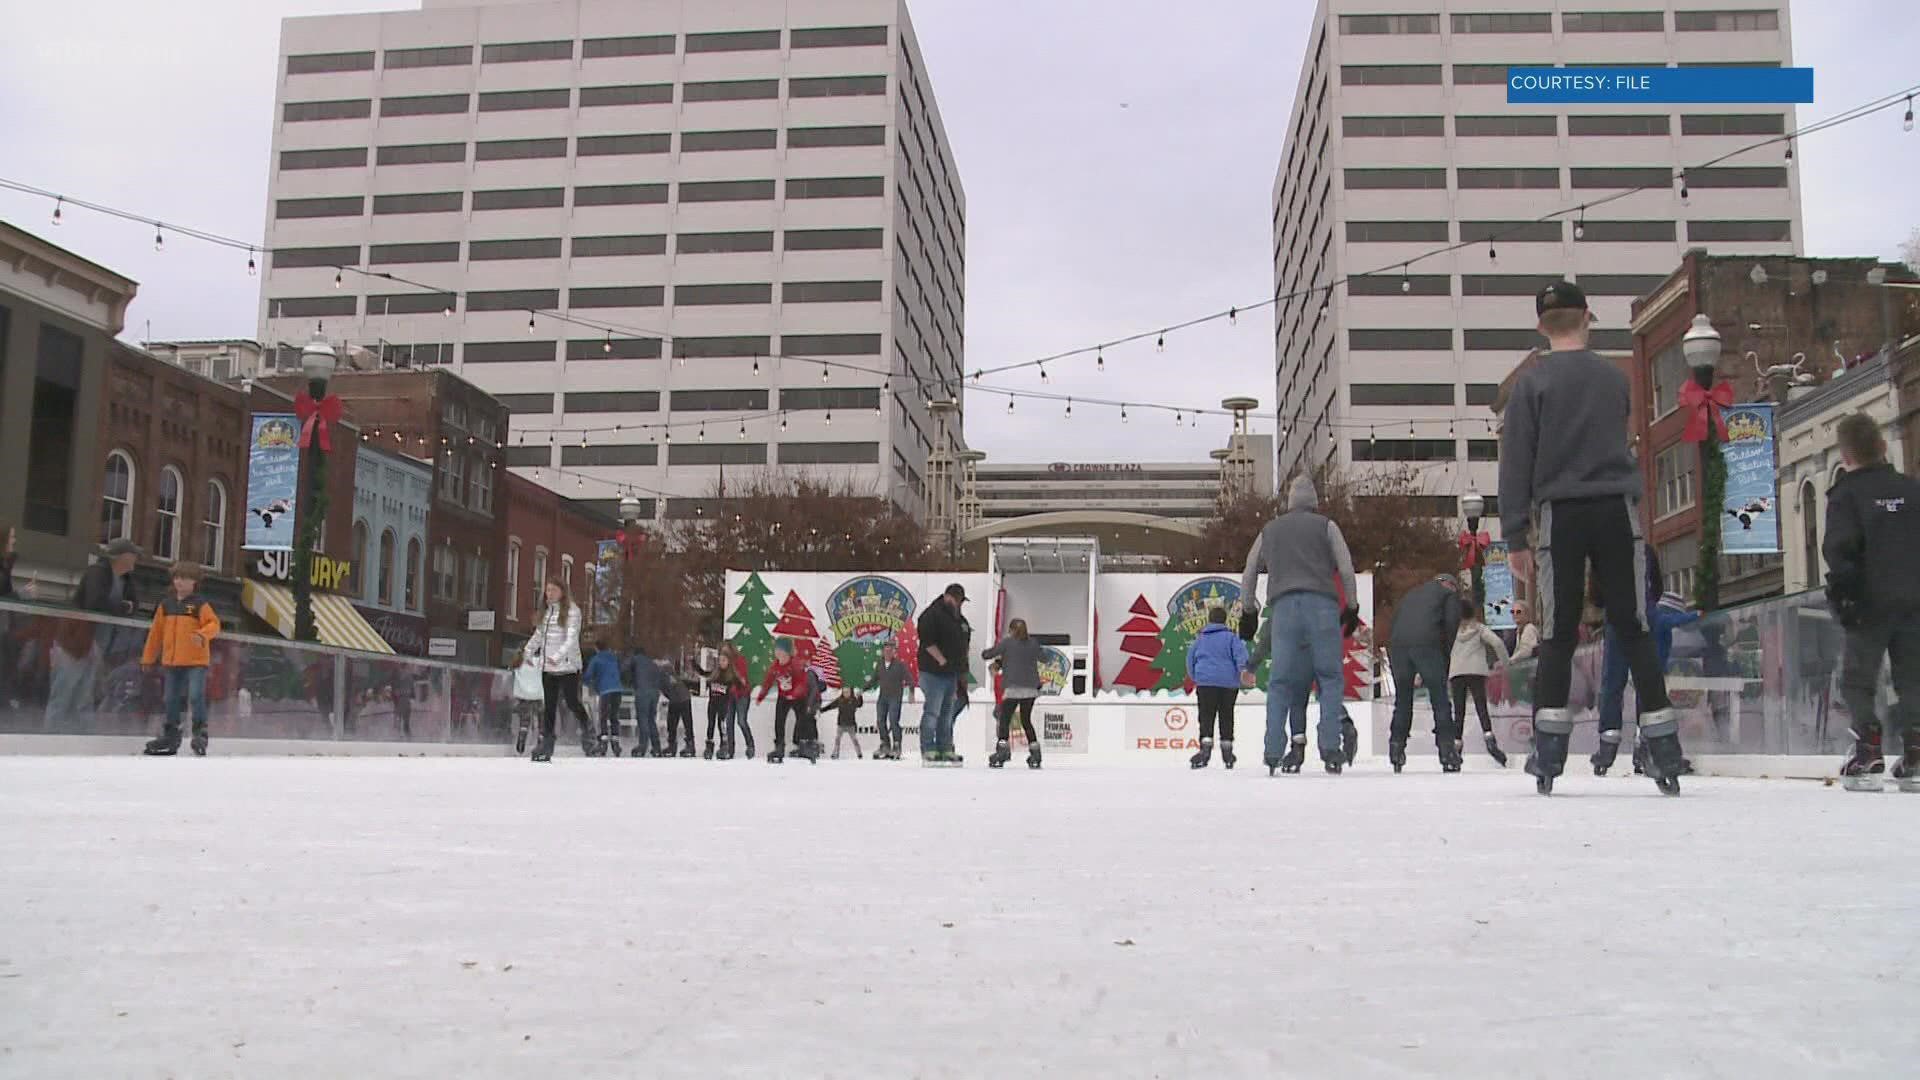 Crews are working to set up one of Knoxville's beloved holiday traditions — the Holidays on Ice skating rink.